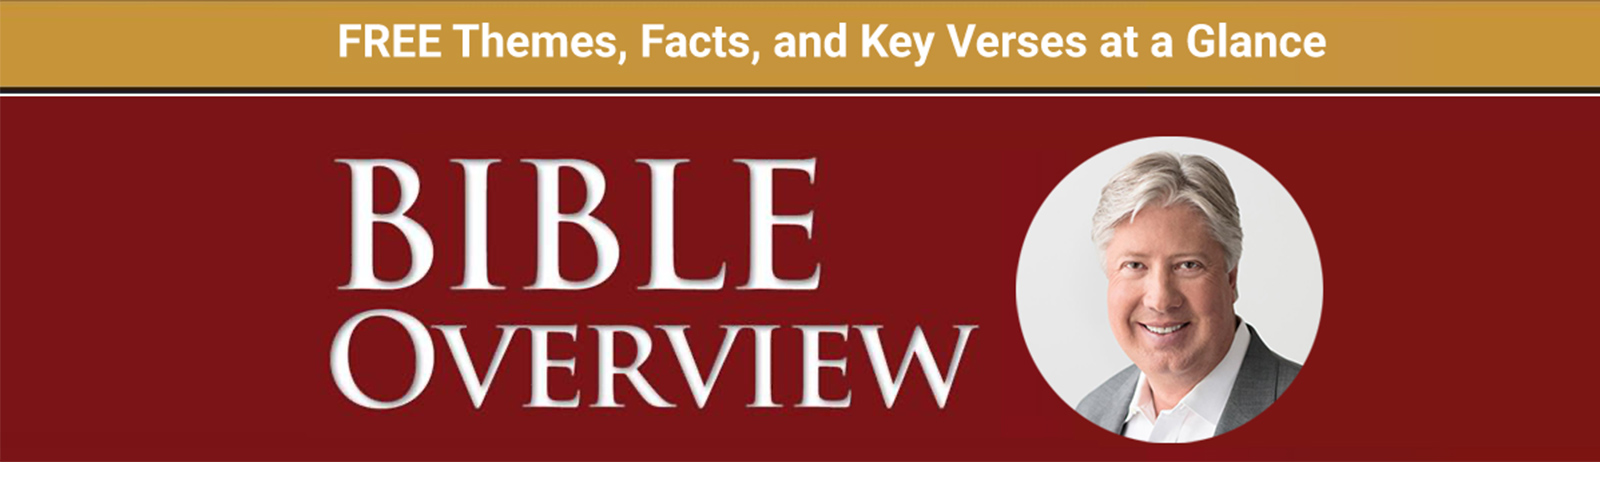 Bible Overview - Free Themes, Facts, and Key Verses at a Glance